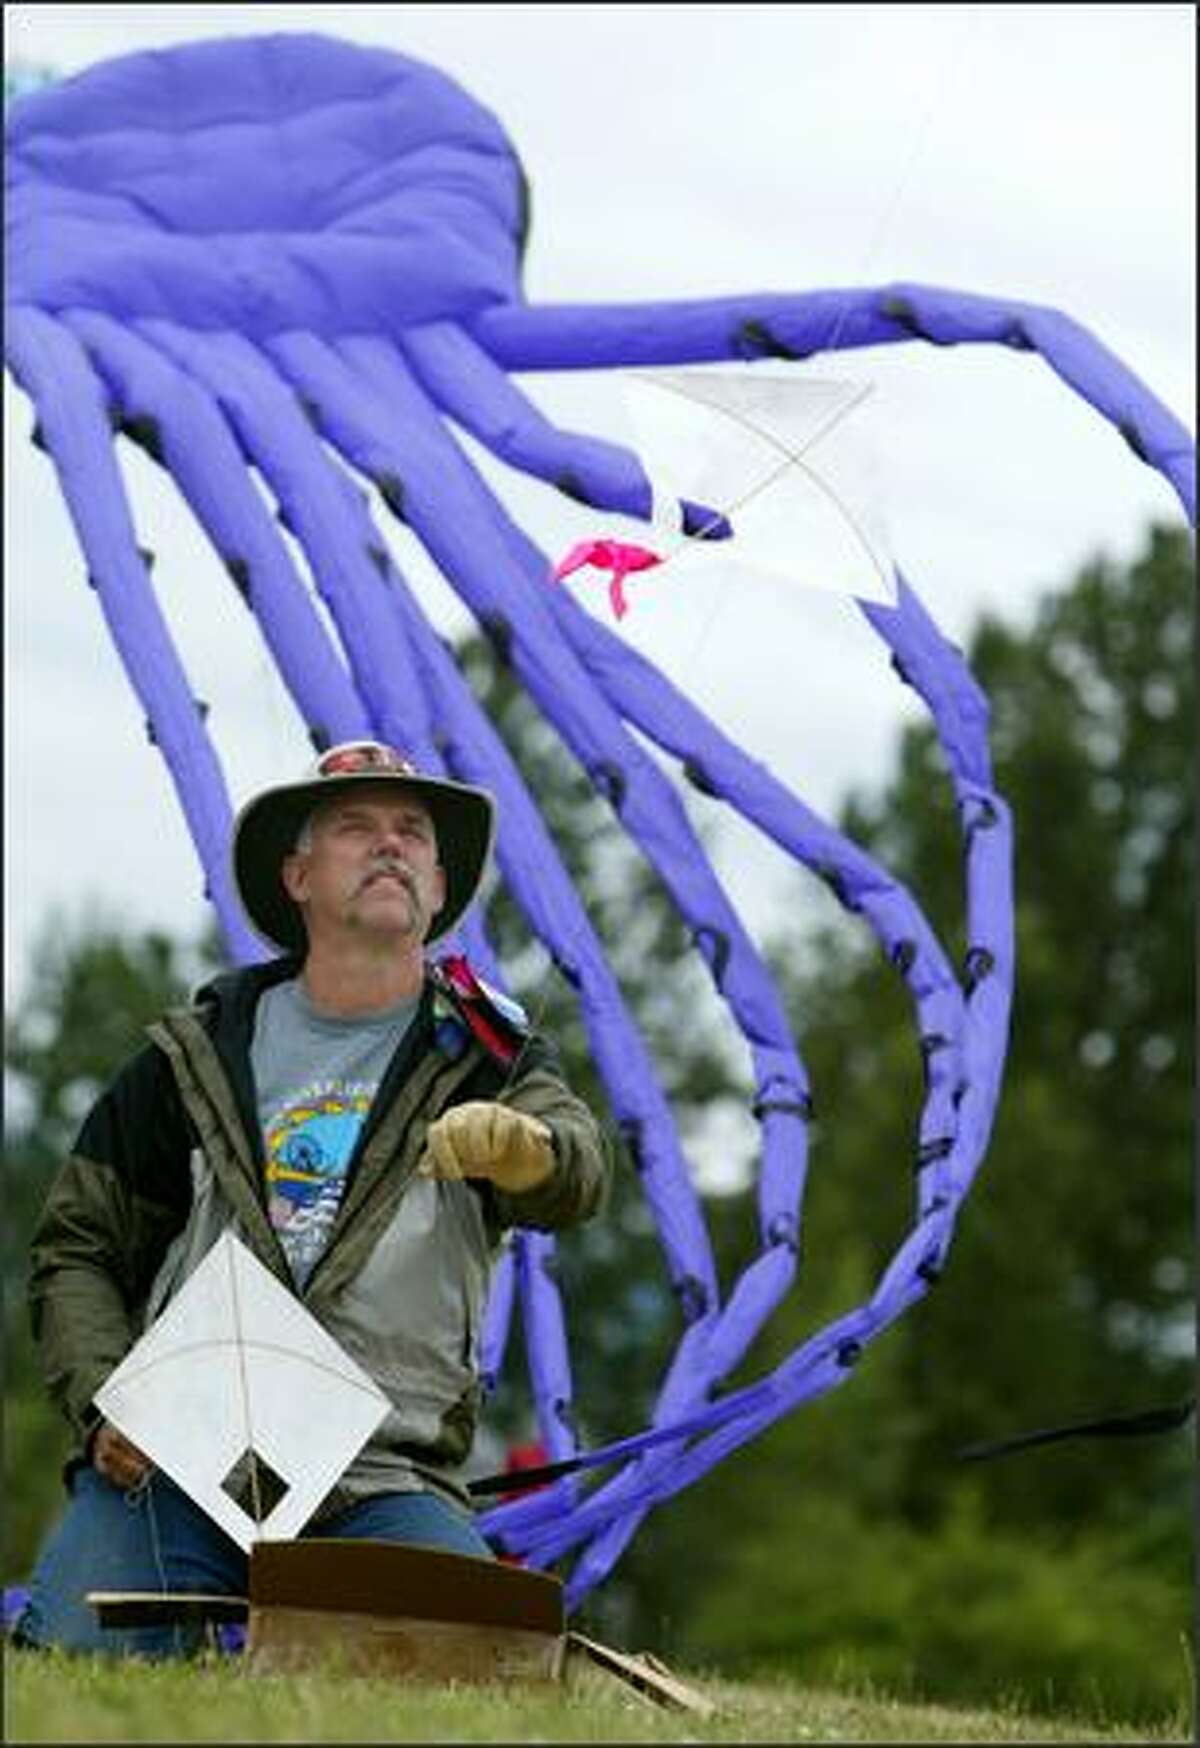 Rick White launches a handmade train of 50 kites at Kite Hill at Sand Point Magnuson Park as a giant purple octopus kite launches behind him. Sunday was the Washington Kitefliers Association's annual Father's Day Kite Fly. The event drew a mix of beginning and expert kite fliers.